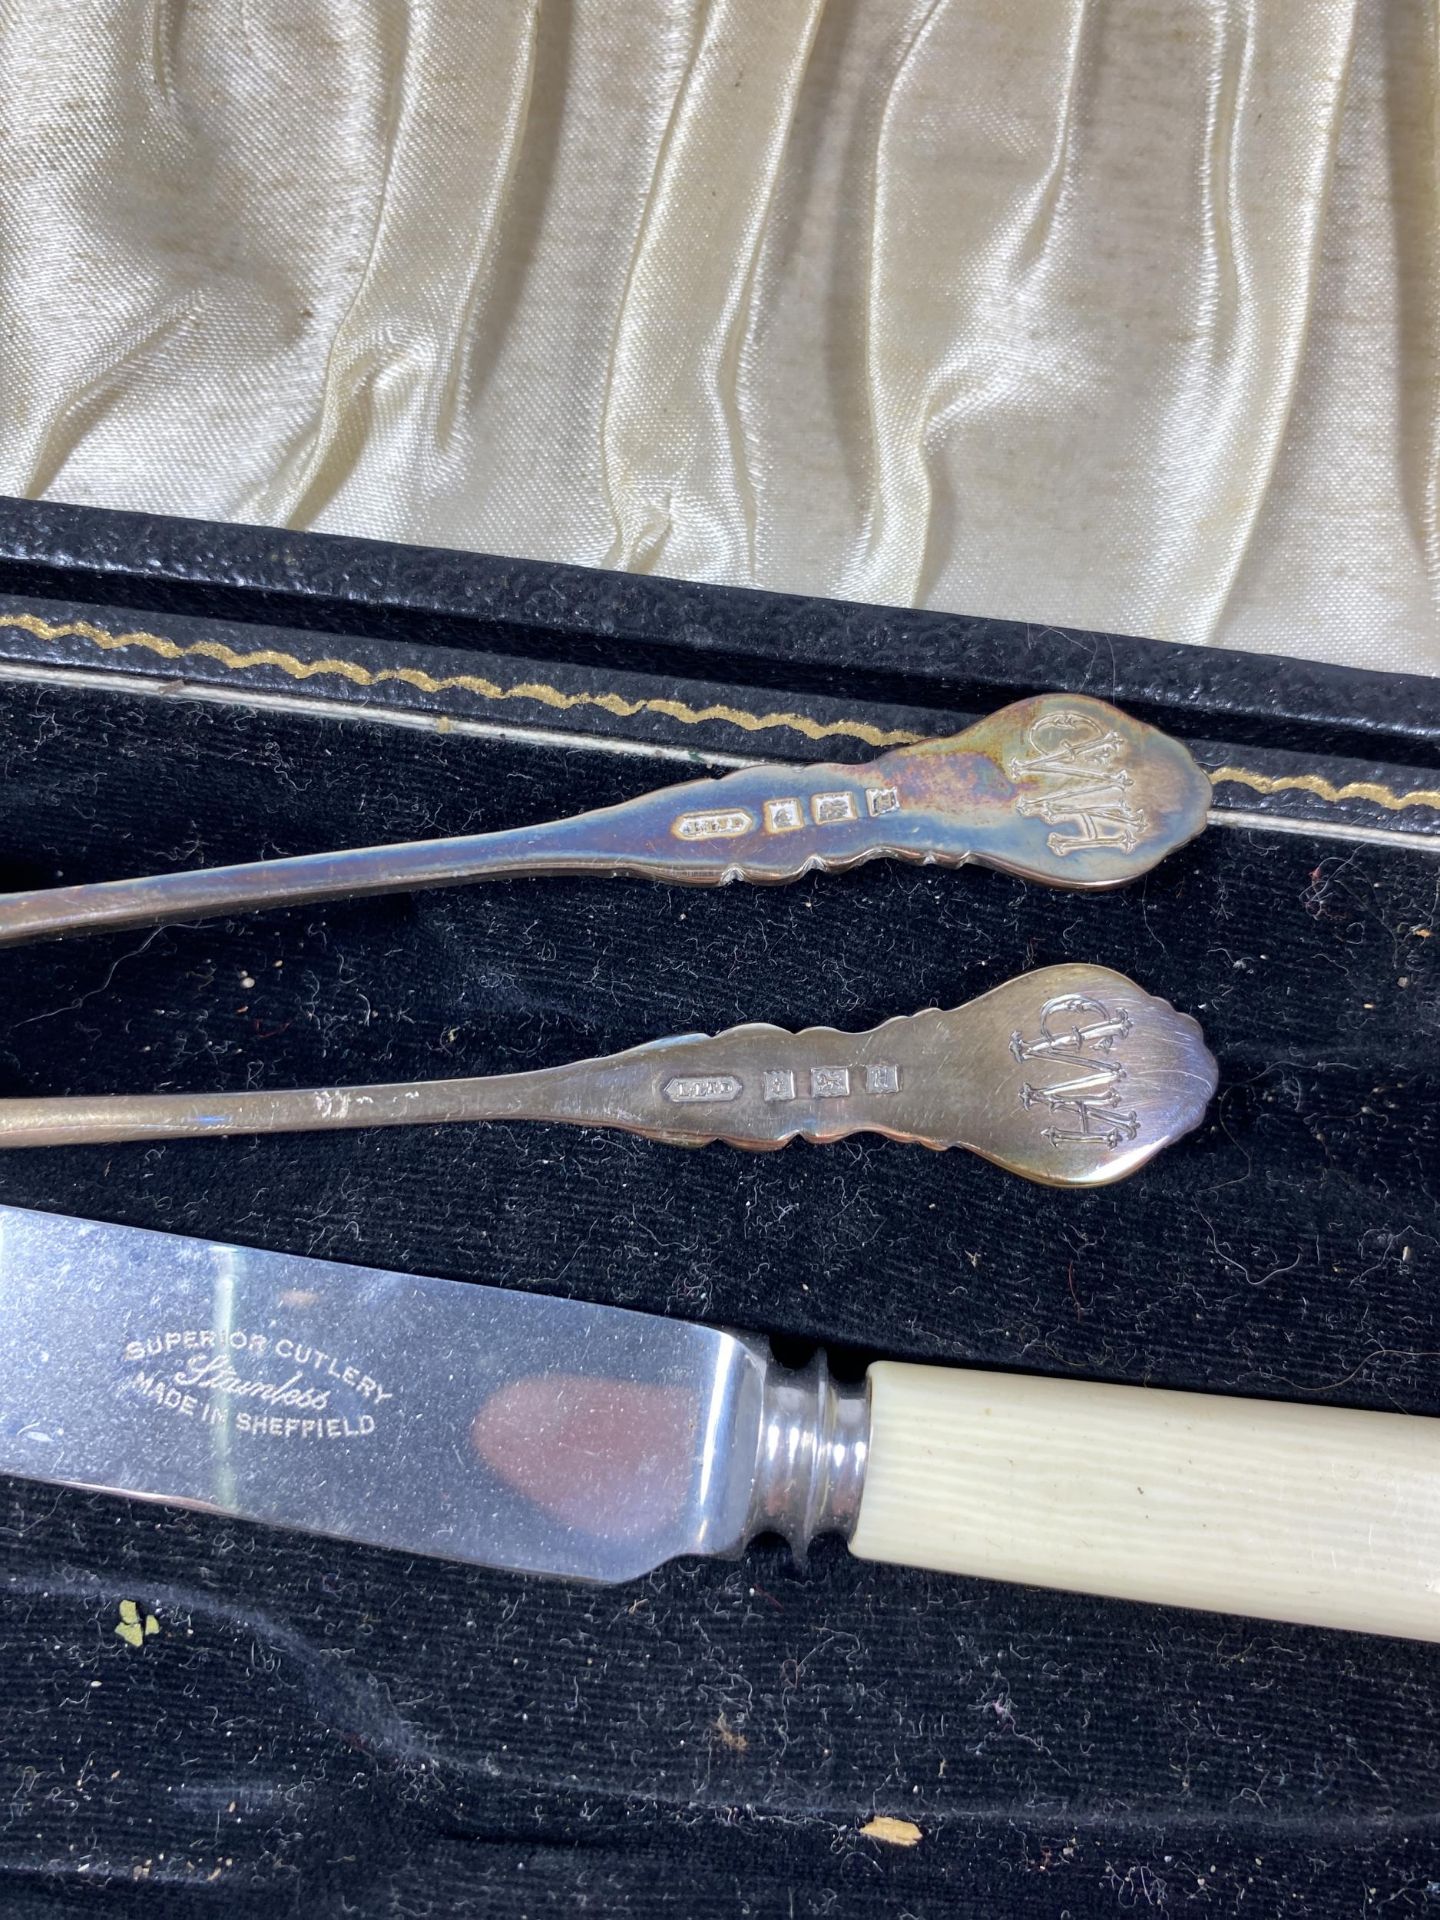 TWO BOXED ITEMS - SILVER SPOON AND SILVER FLATWARE SET (KNIFE IS STAINLESS) - Image 2 of 3